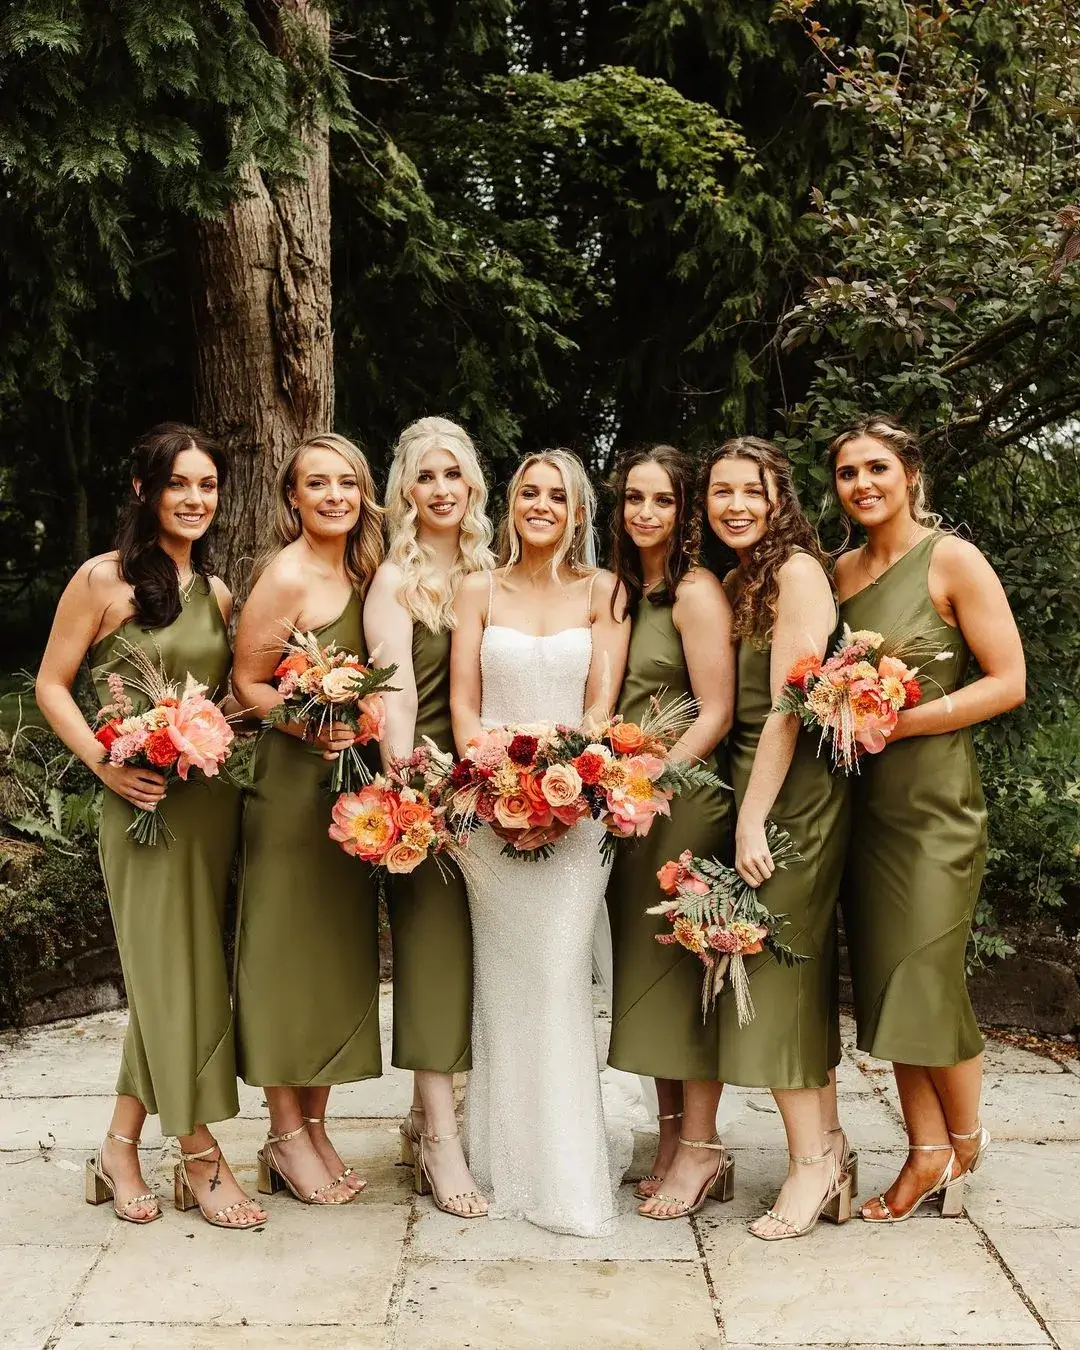 Olive Green Bridesmaid Dresses For All Styles And Seasons